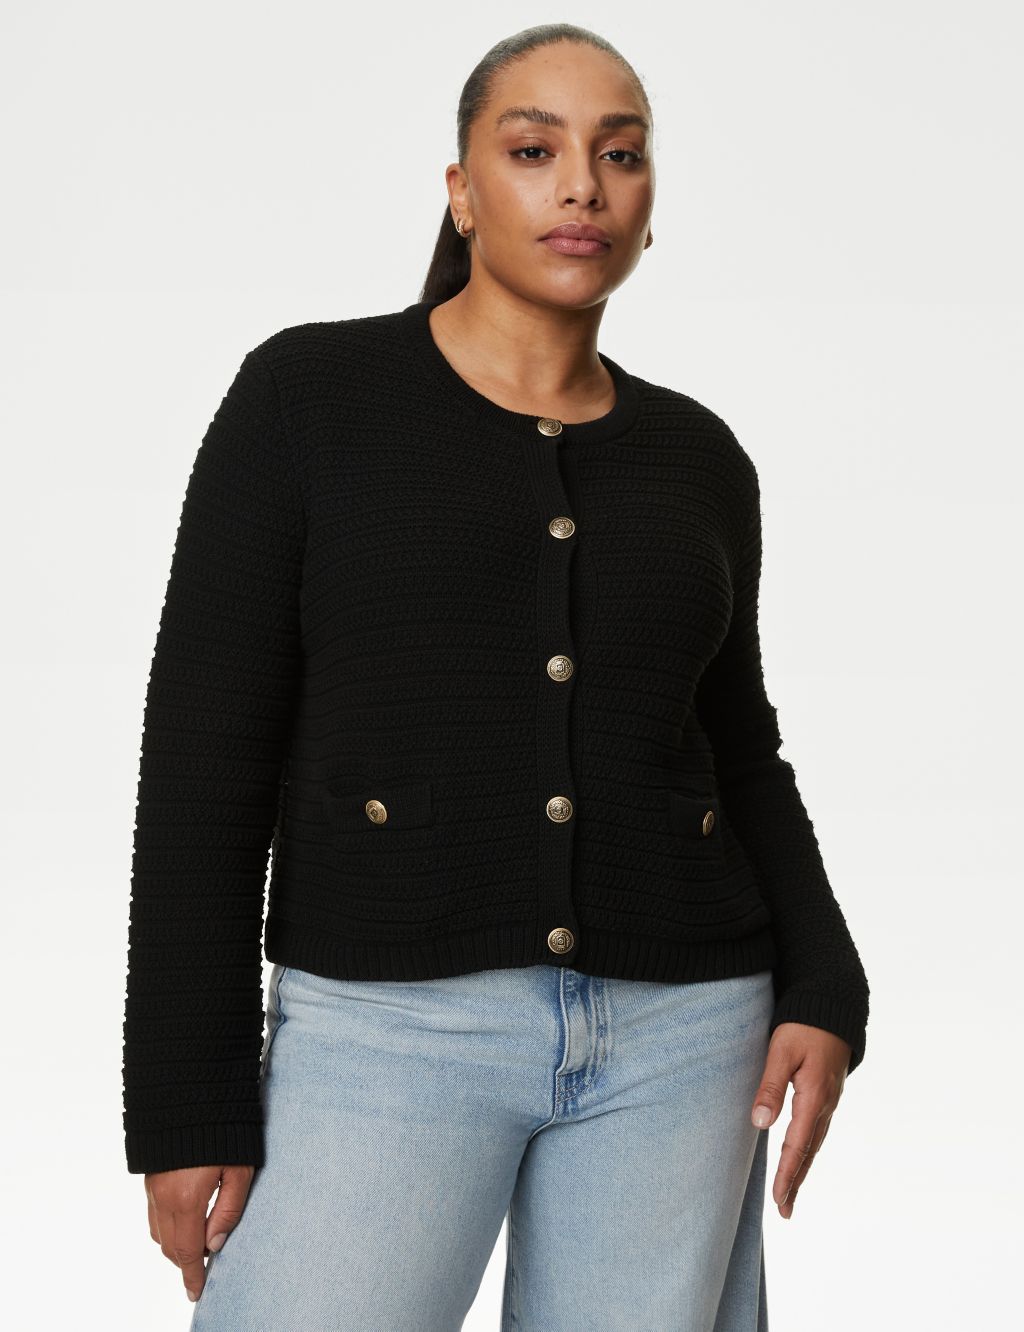 Cotton Blend Textured Knitted Jacket | M&S Collection | M&S